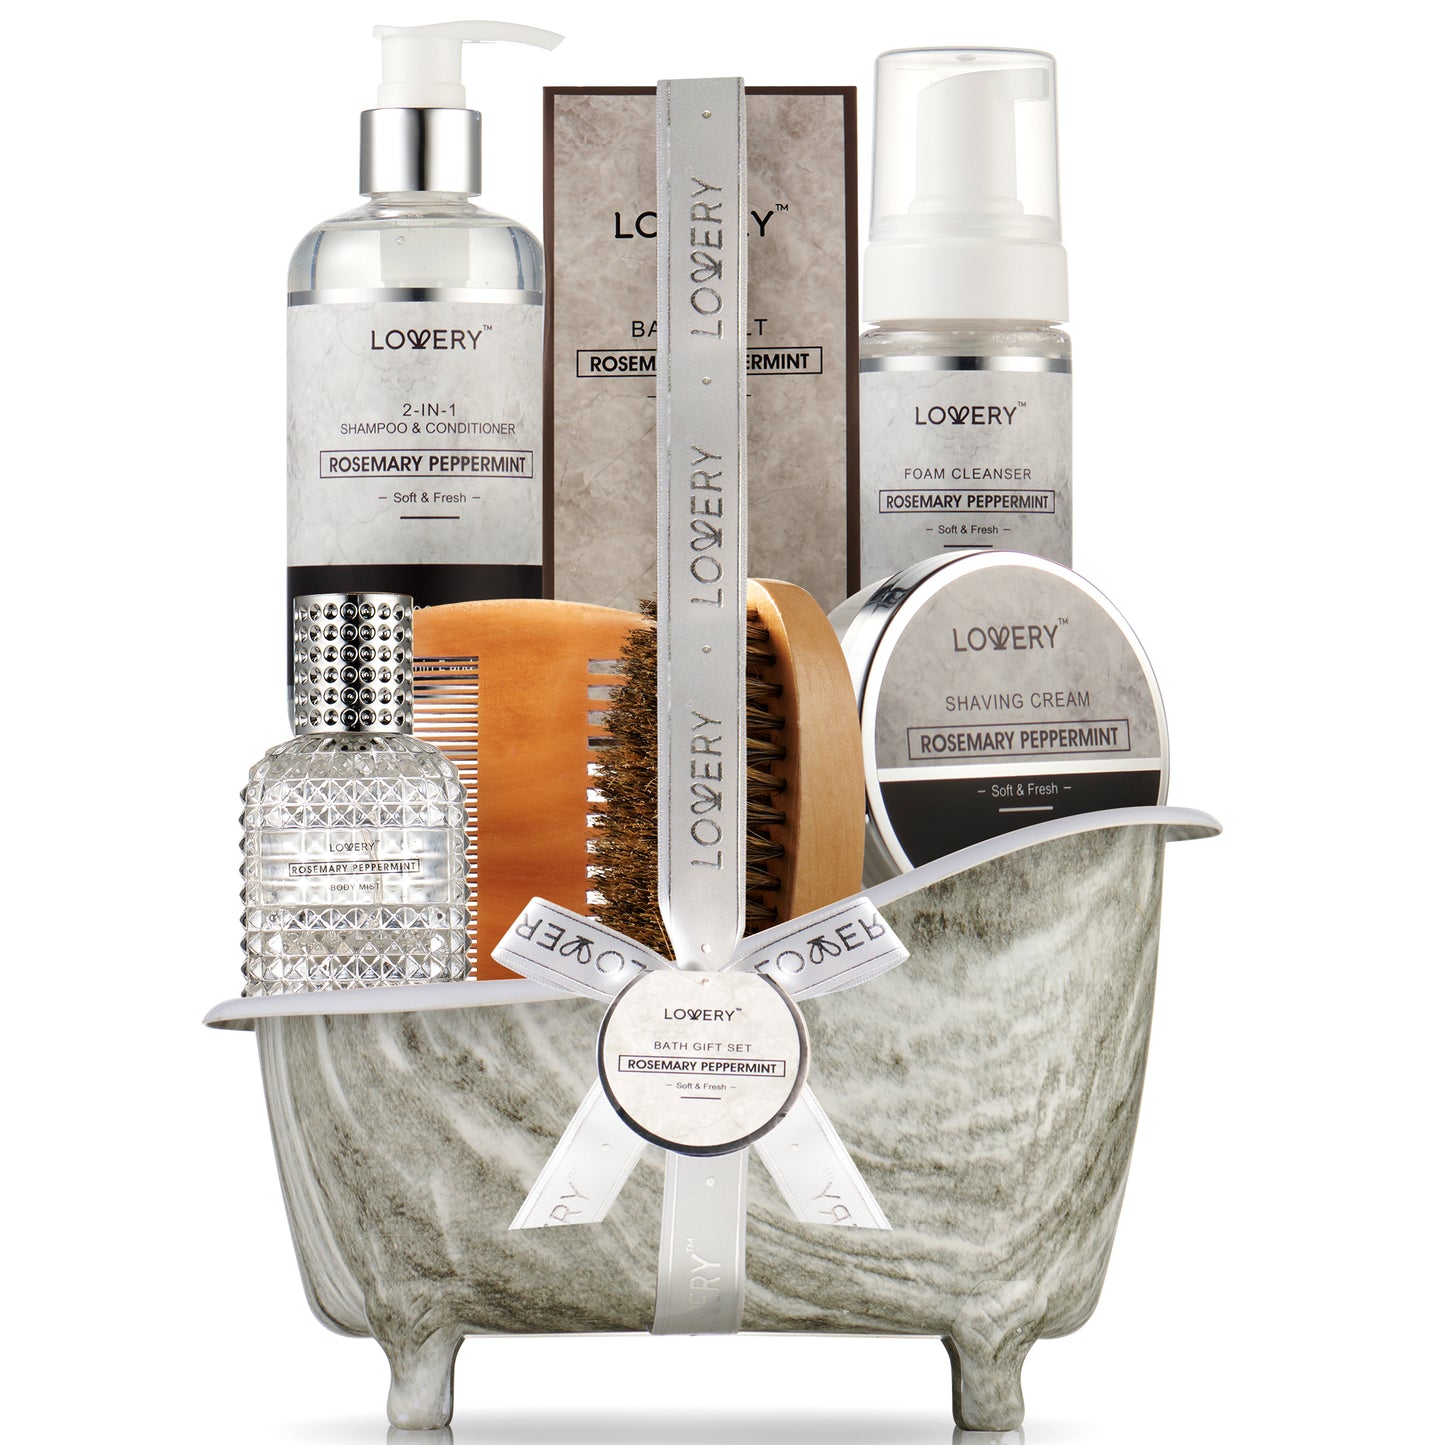 relaxing gift set, lovery gift set, lovery relaxing gift set, rosemary peppermint gift set, rosemary gift, peppermint beauty gift set, rosemary body lotion, peppermint bubble bath, lovery gift baskets, lovery gift box, lovery